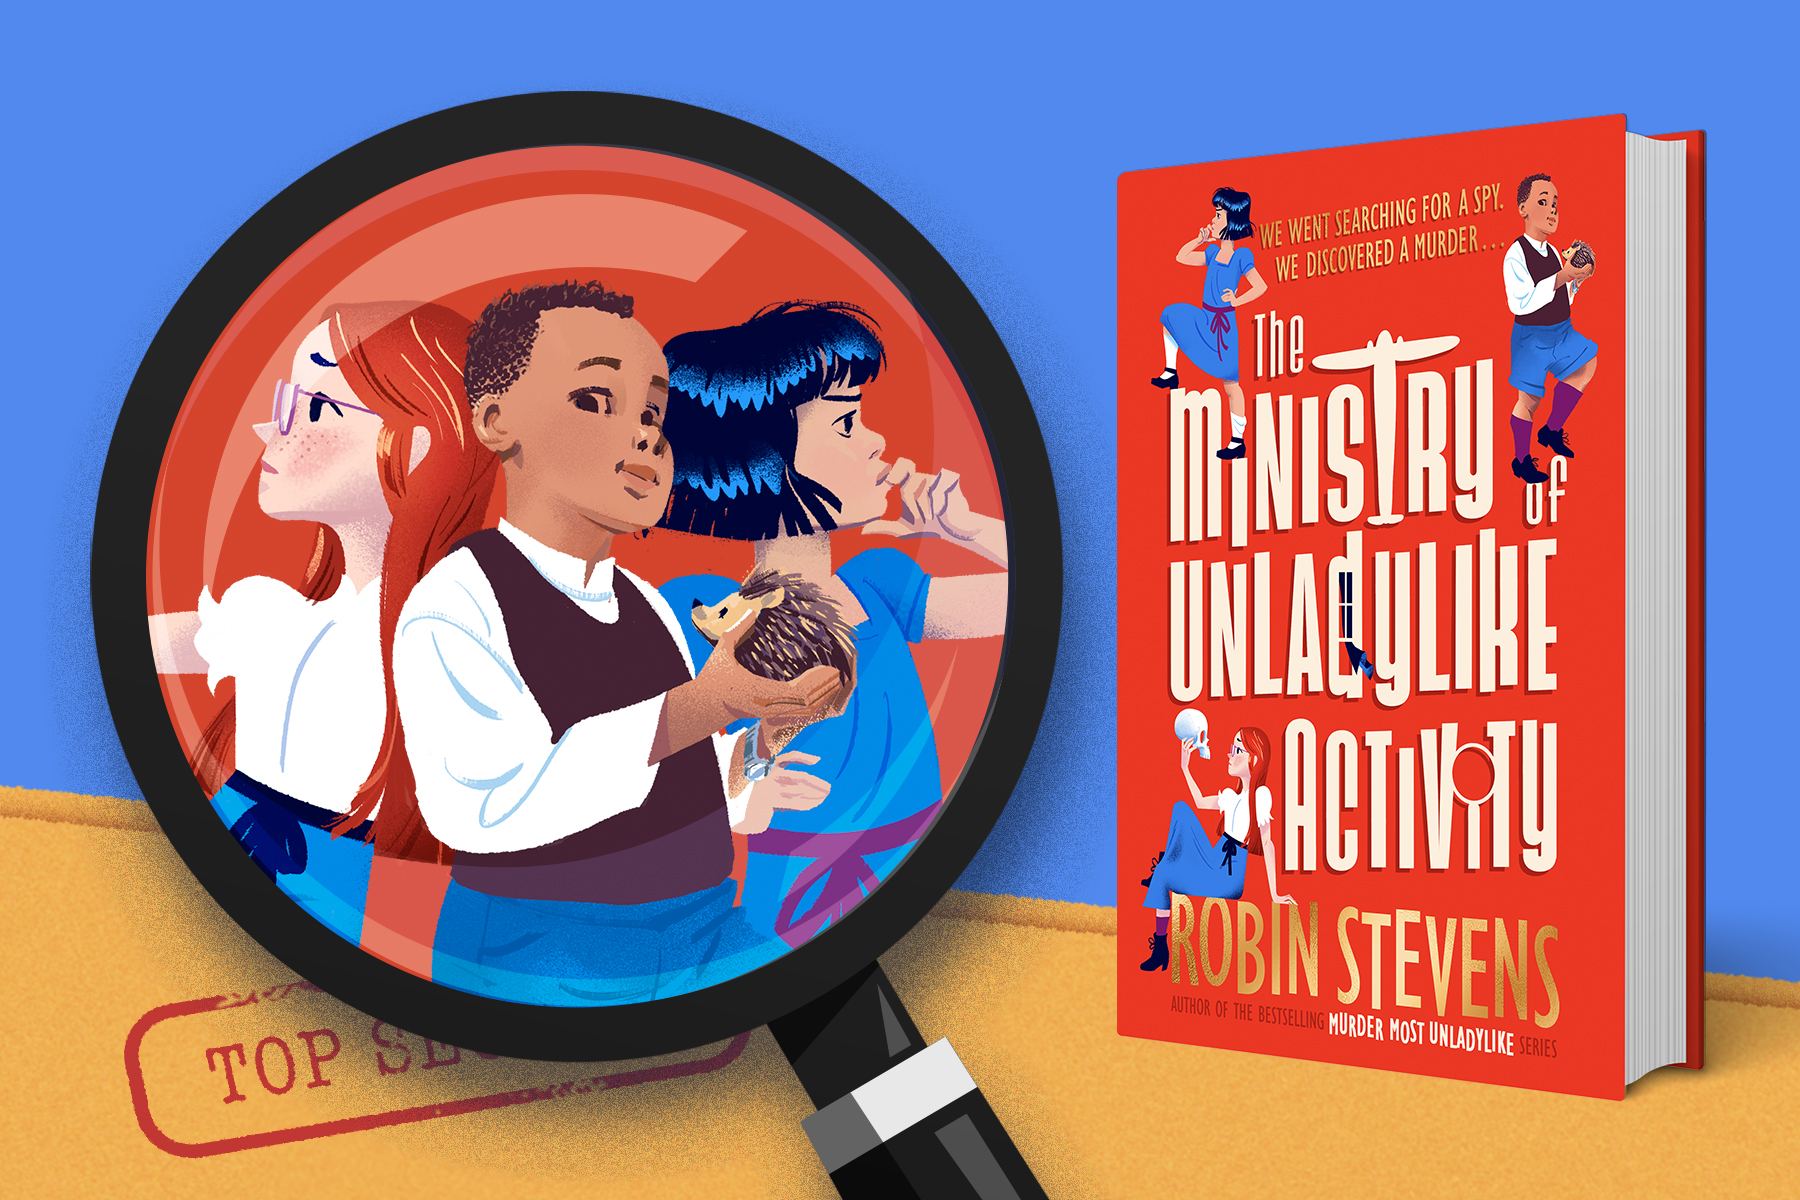 A photo of the new front cover of Ministry of Unladylike Activity against a blue background. Next to the book is an illustration of three children with a magnifying glass enlarging them